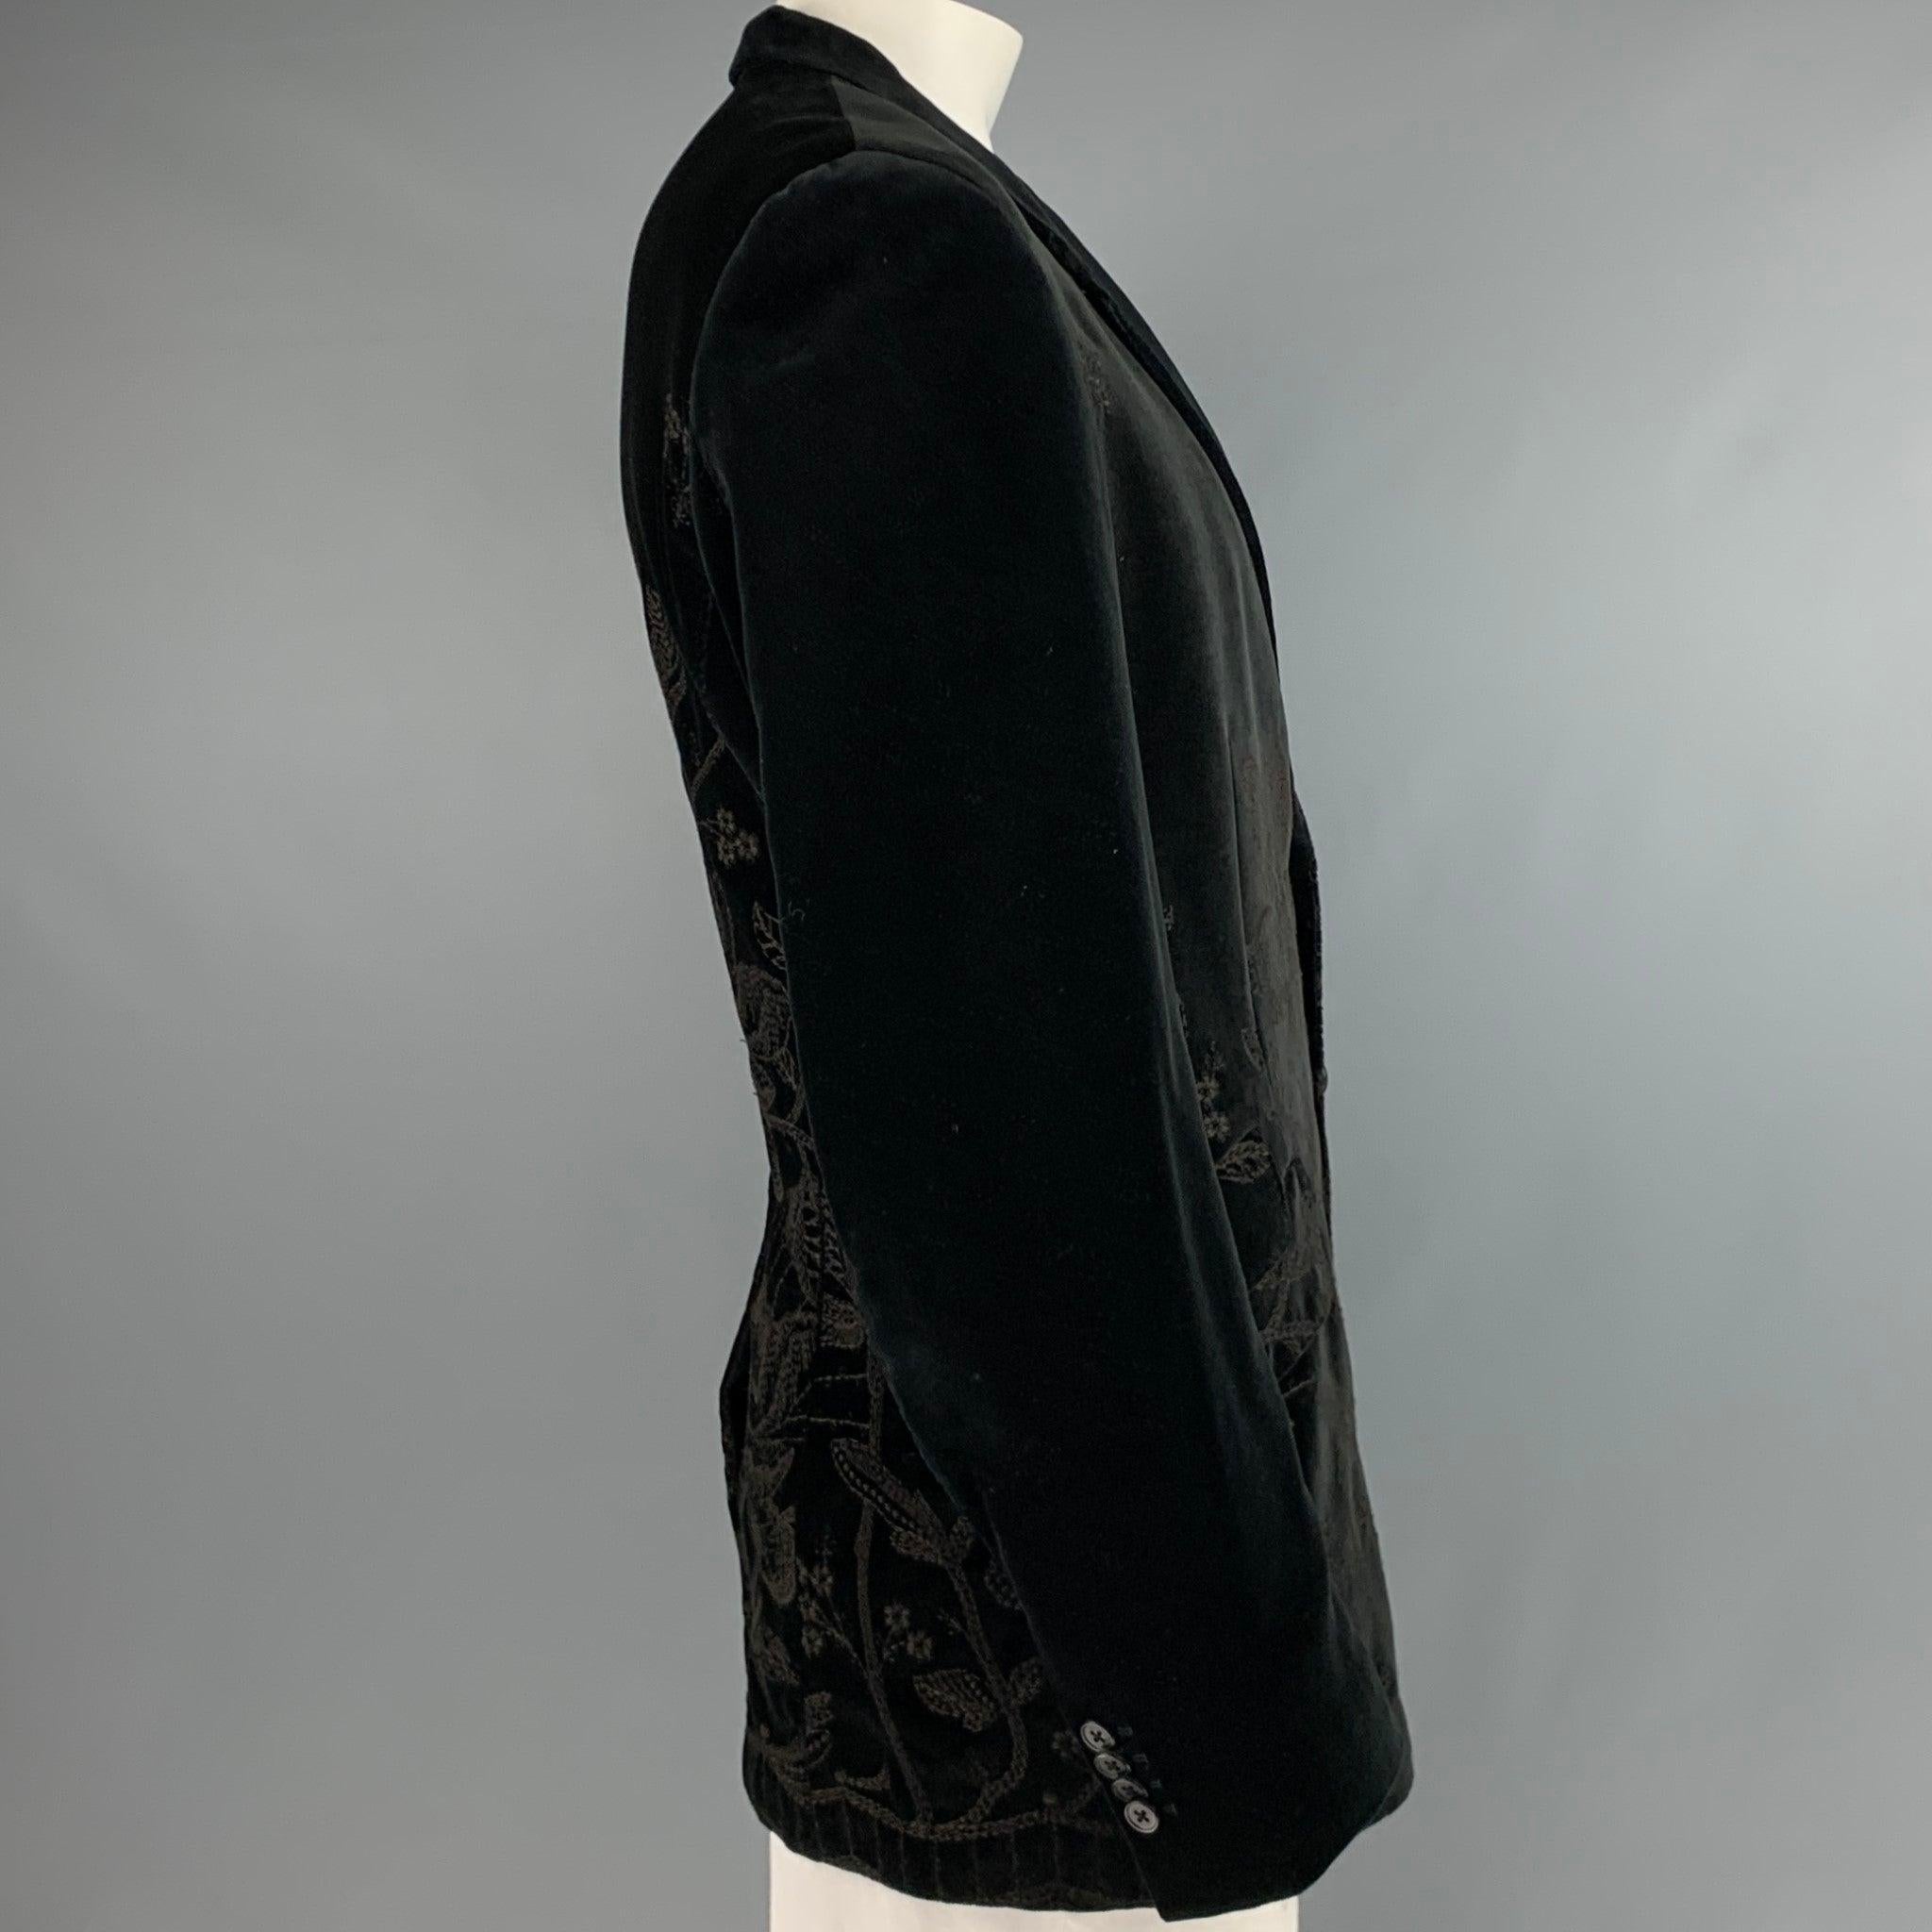 PAUL SMITH
sport coat in a
black velvet fabric featuring brown floral embroidery, notch lapel, single vented back, and double button closure. Made in Japan.Very Good Pre-Owned Condition. Minor signs of wear. 

Marked:   46 

Measurements: 
